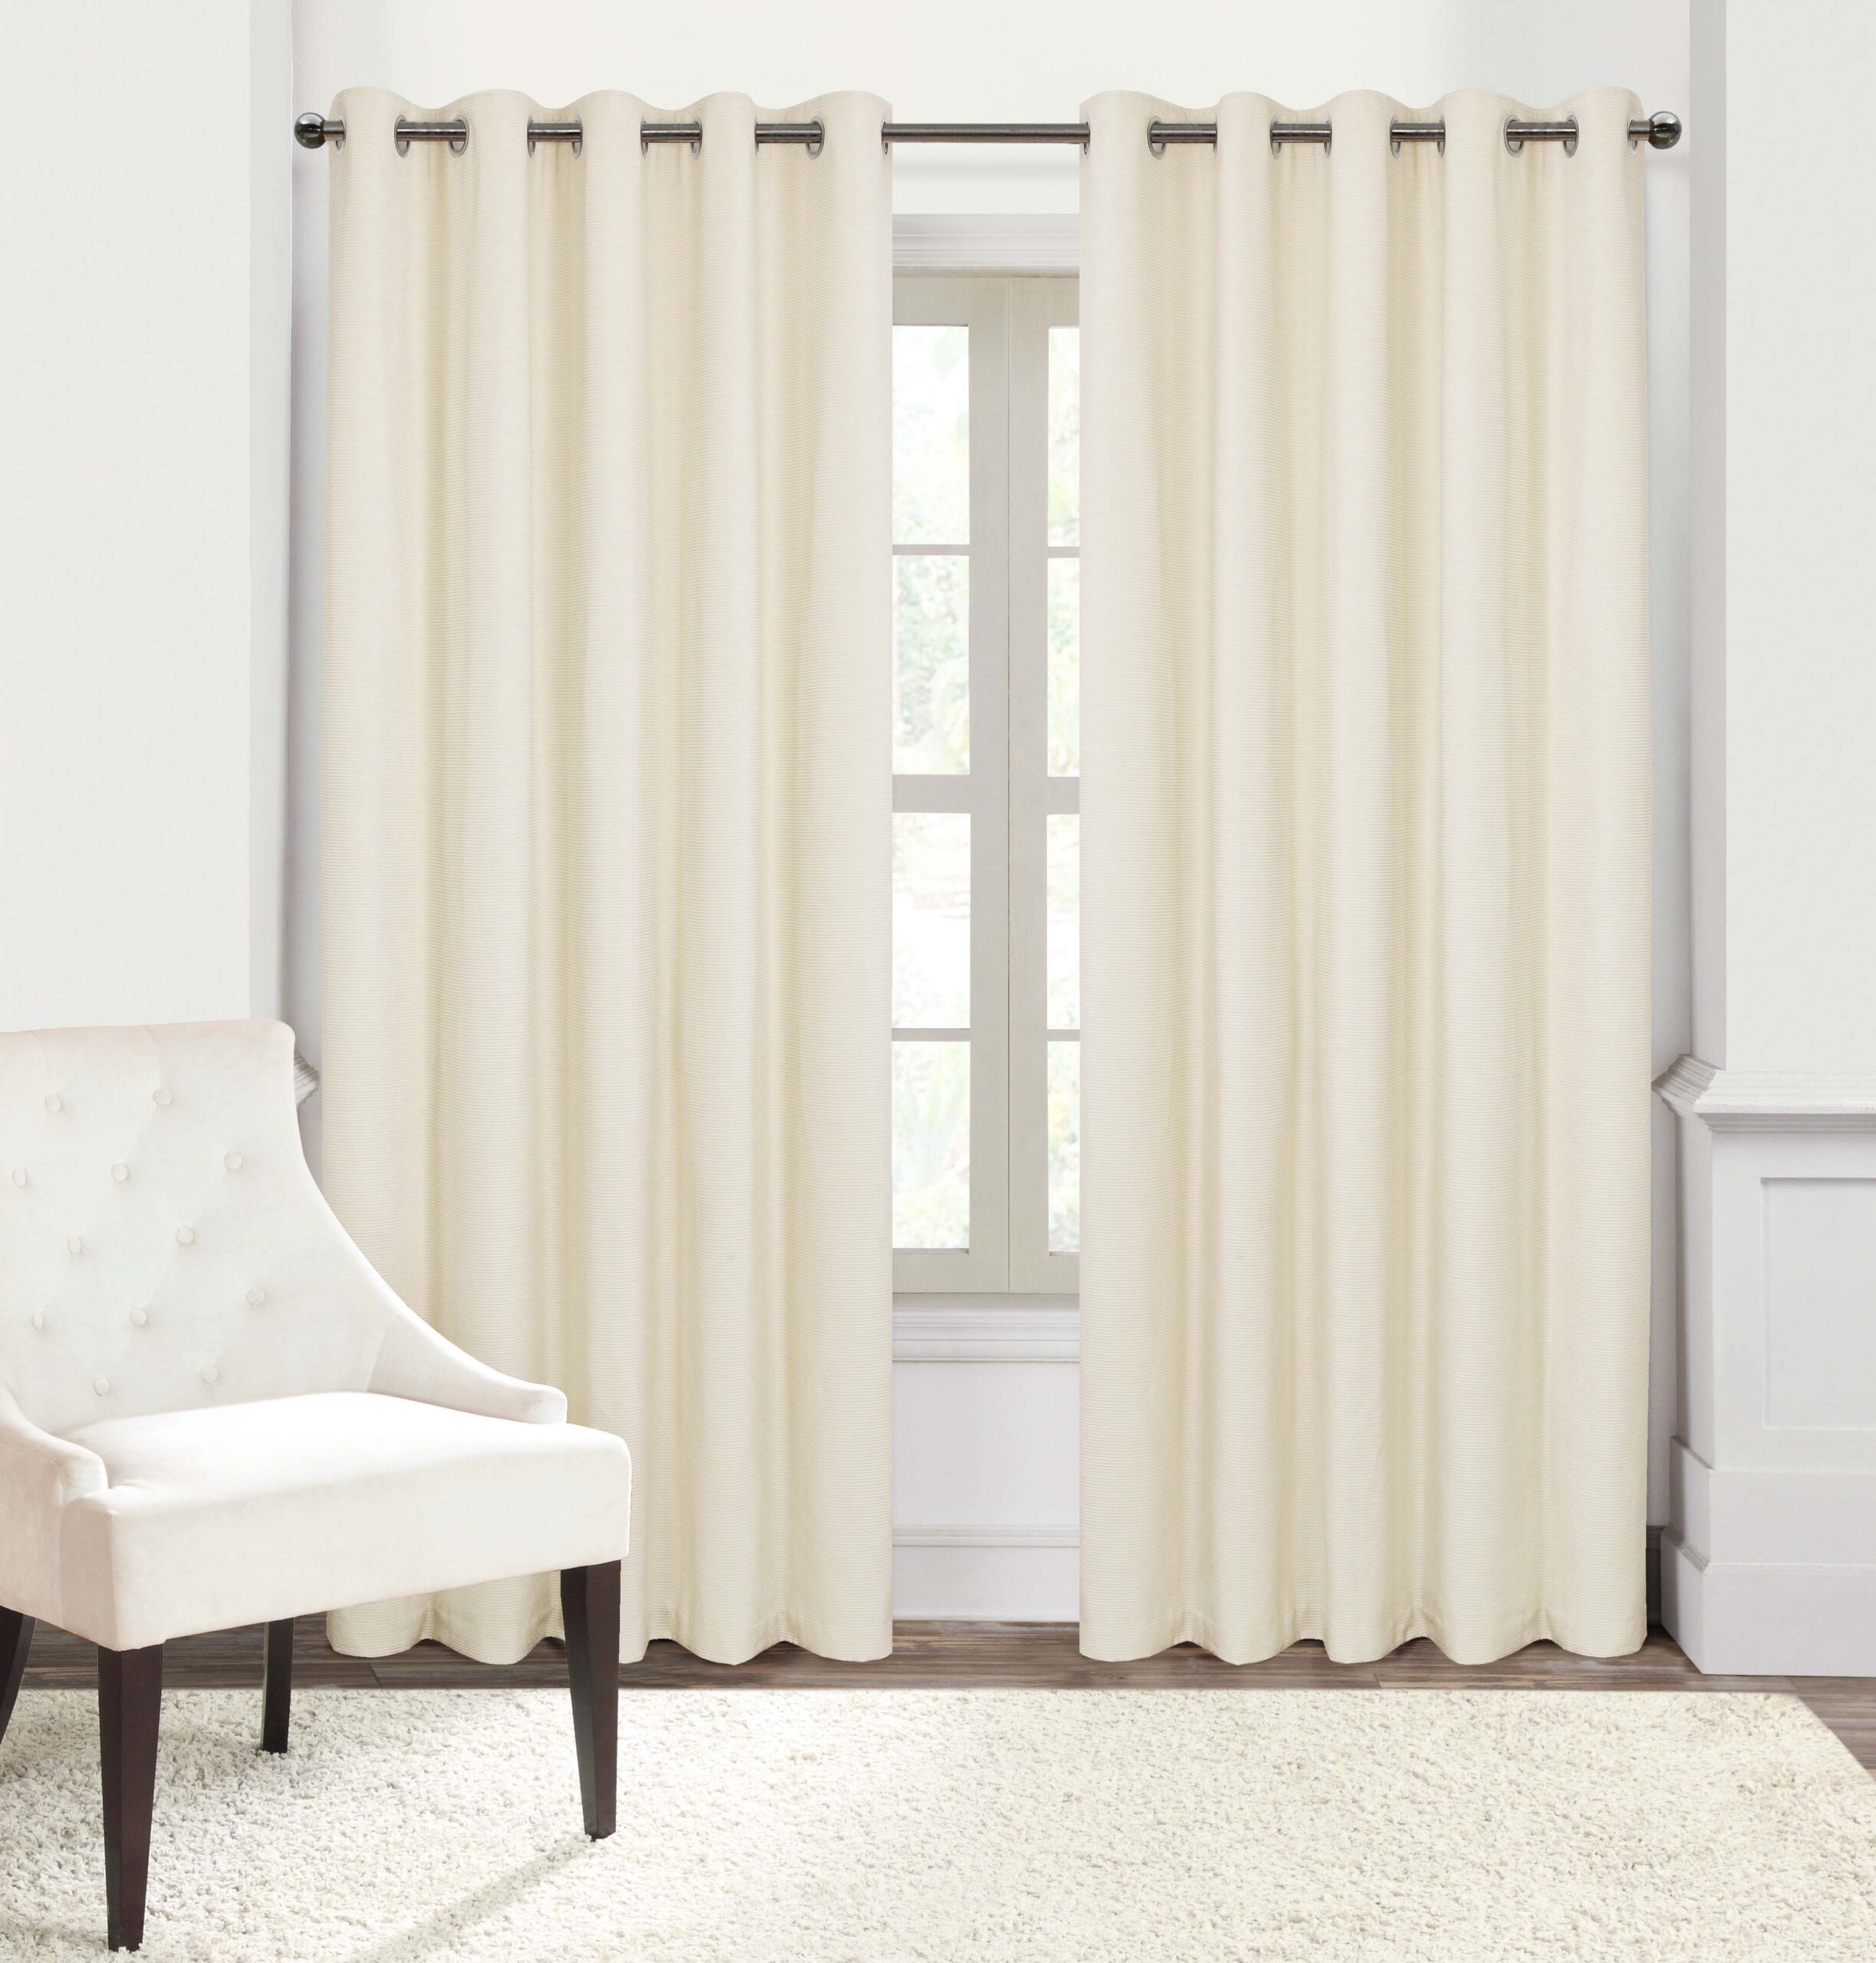 Tips on using cream curtains in your home